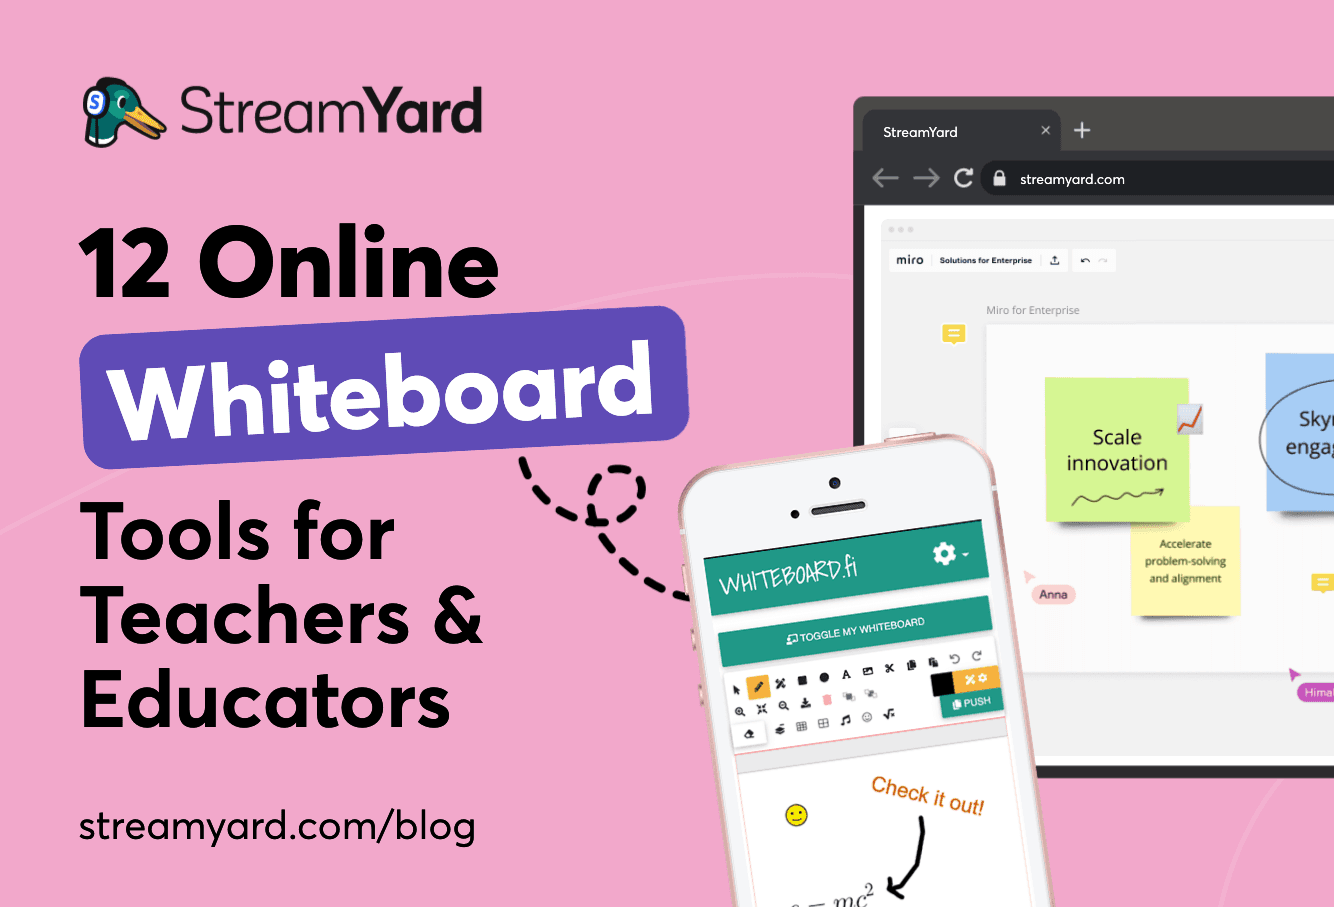 Here are our top picks for online whiteboard tools for teaching to make your live streams more engaging and interactive.